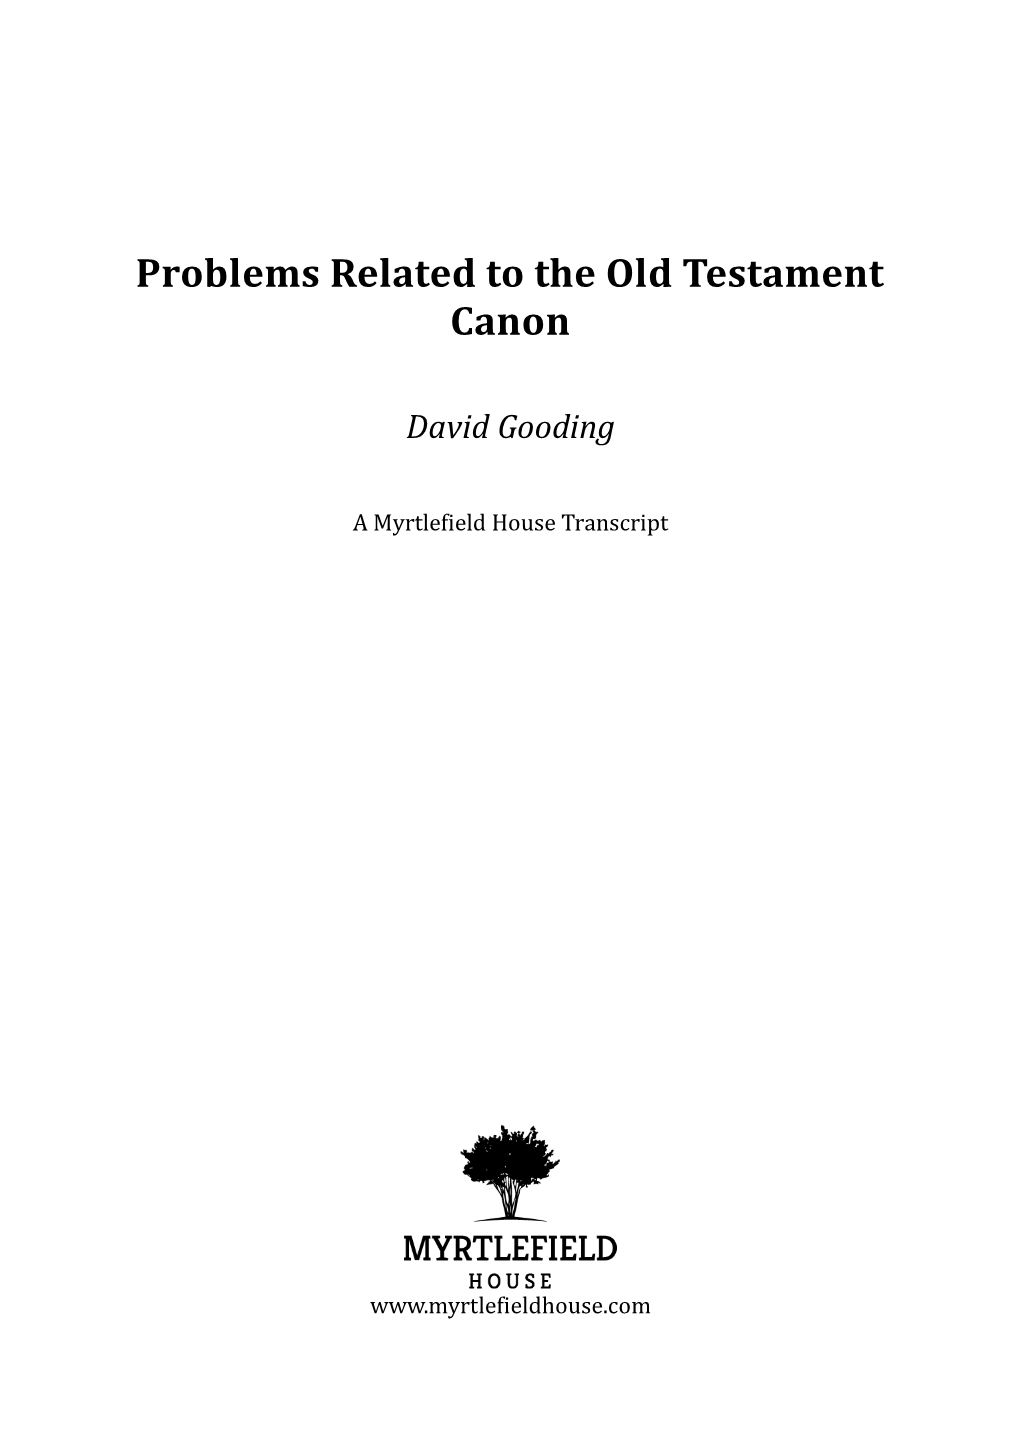 Problems Related to the Old Testament Canon